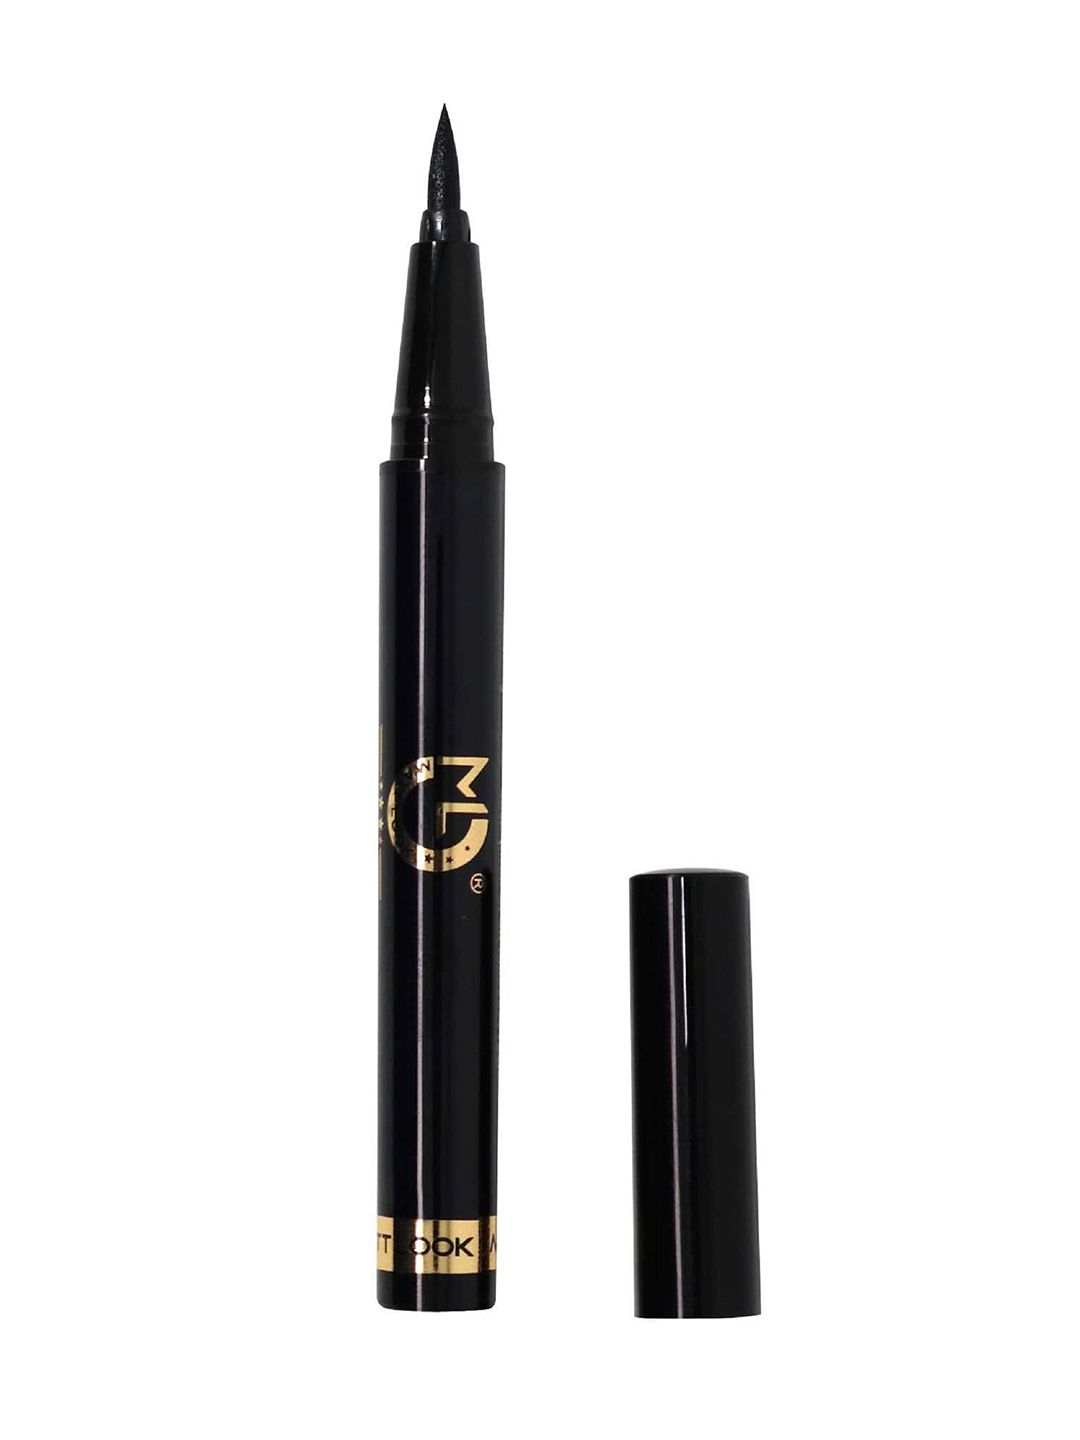 MATTLOOK Black 24 Hr Stay Style Muse Eyeliner 1g Price in India